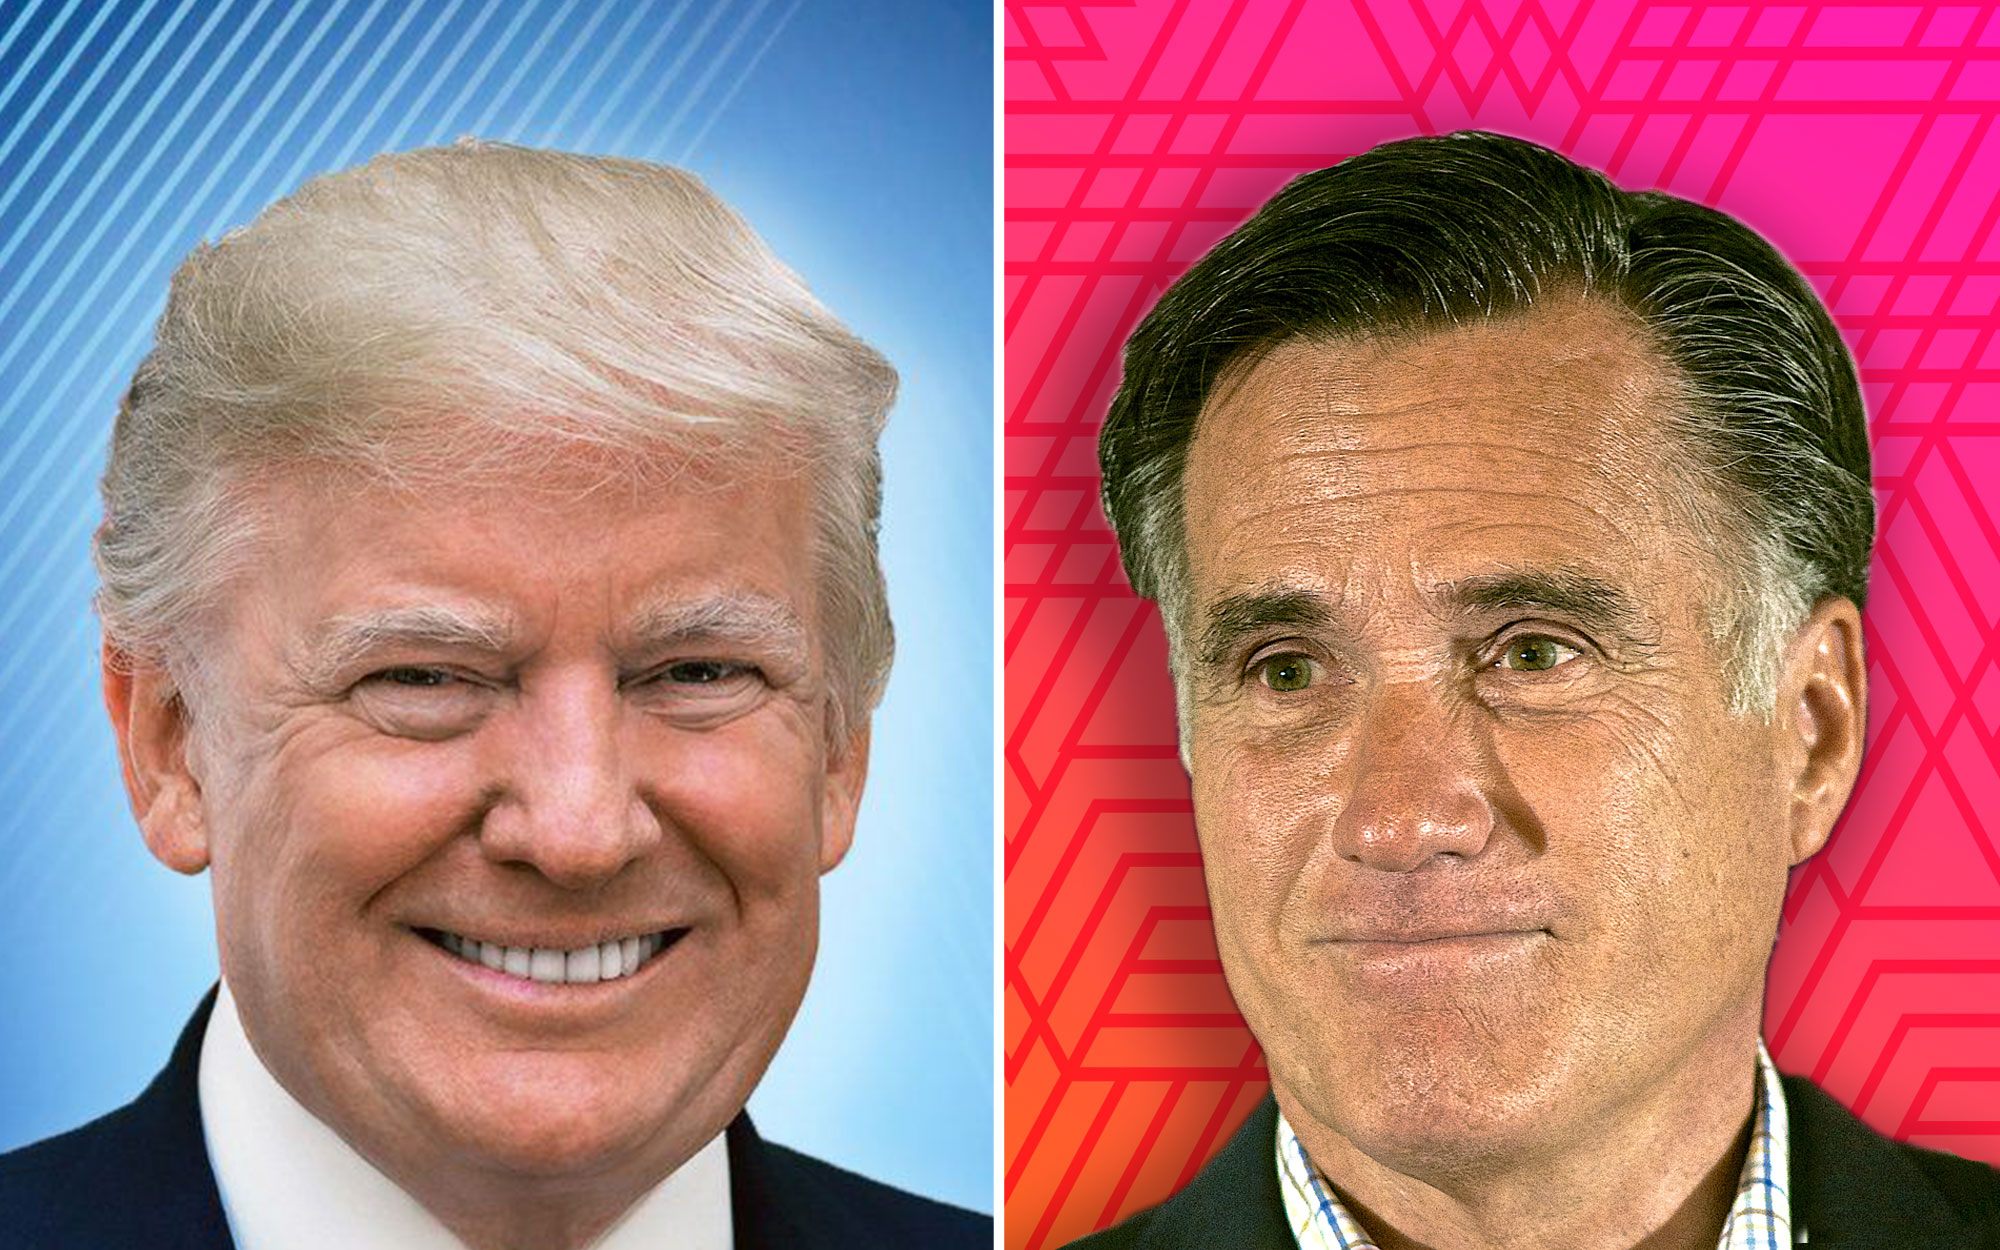 MItt Romney: Is He Considering a 2020 Primary Run Against Donald Trump?